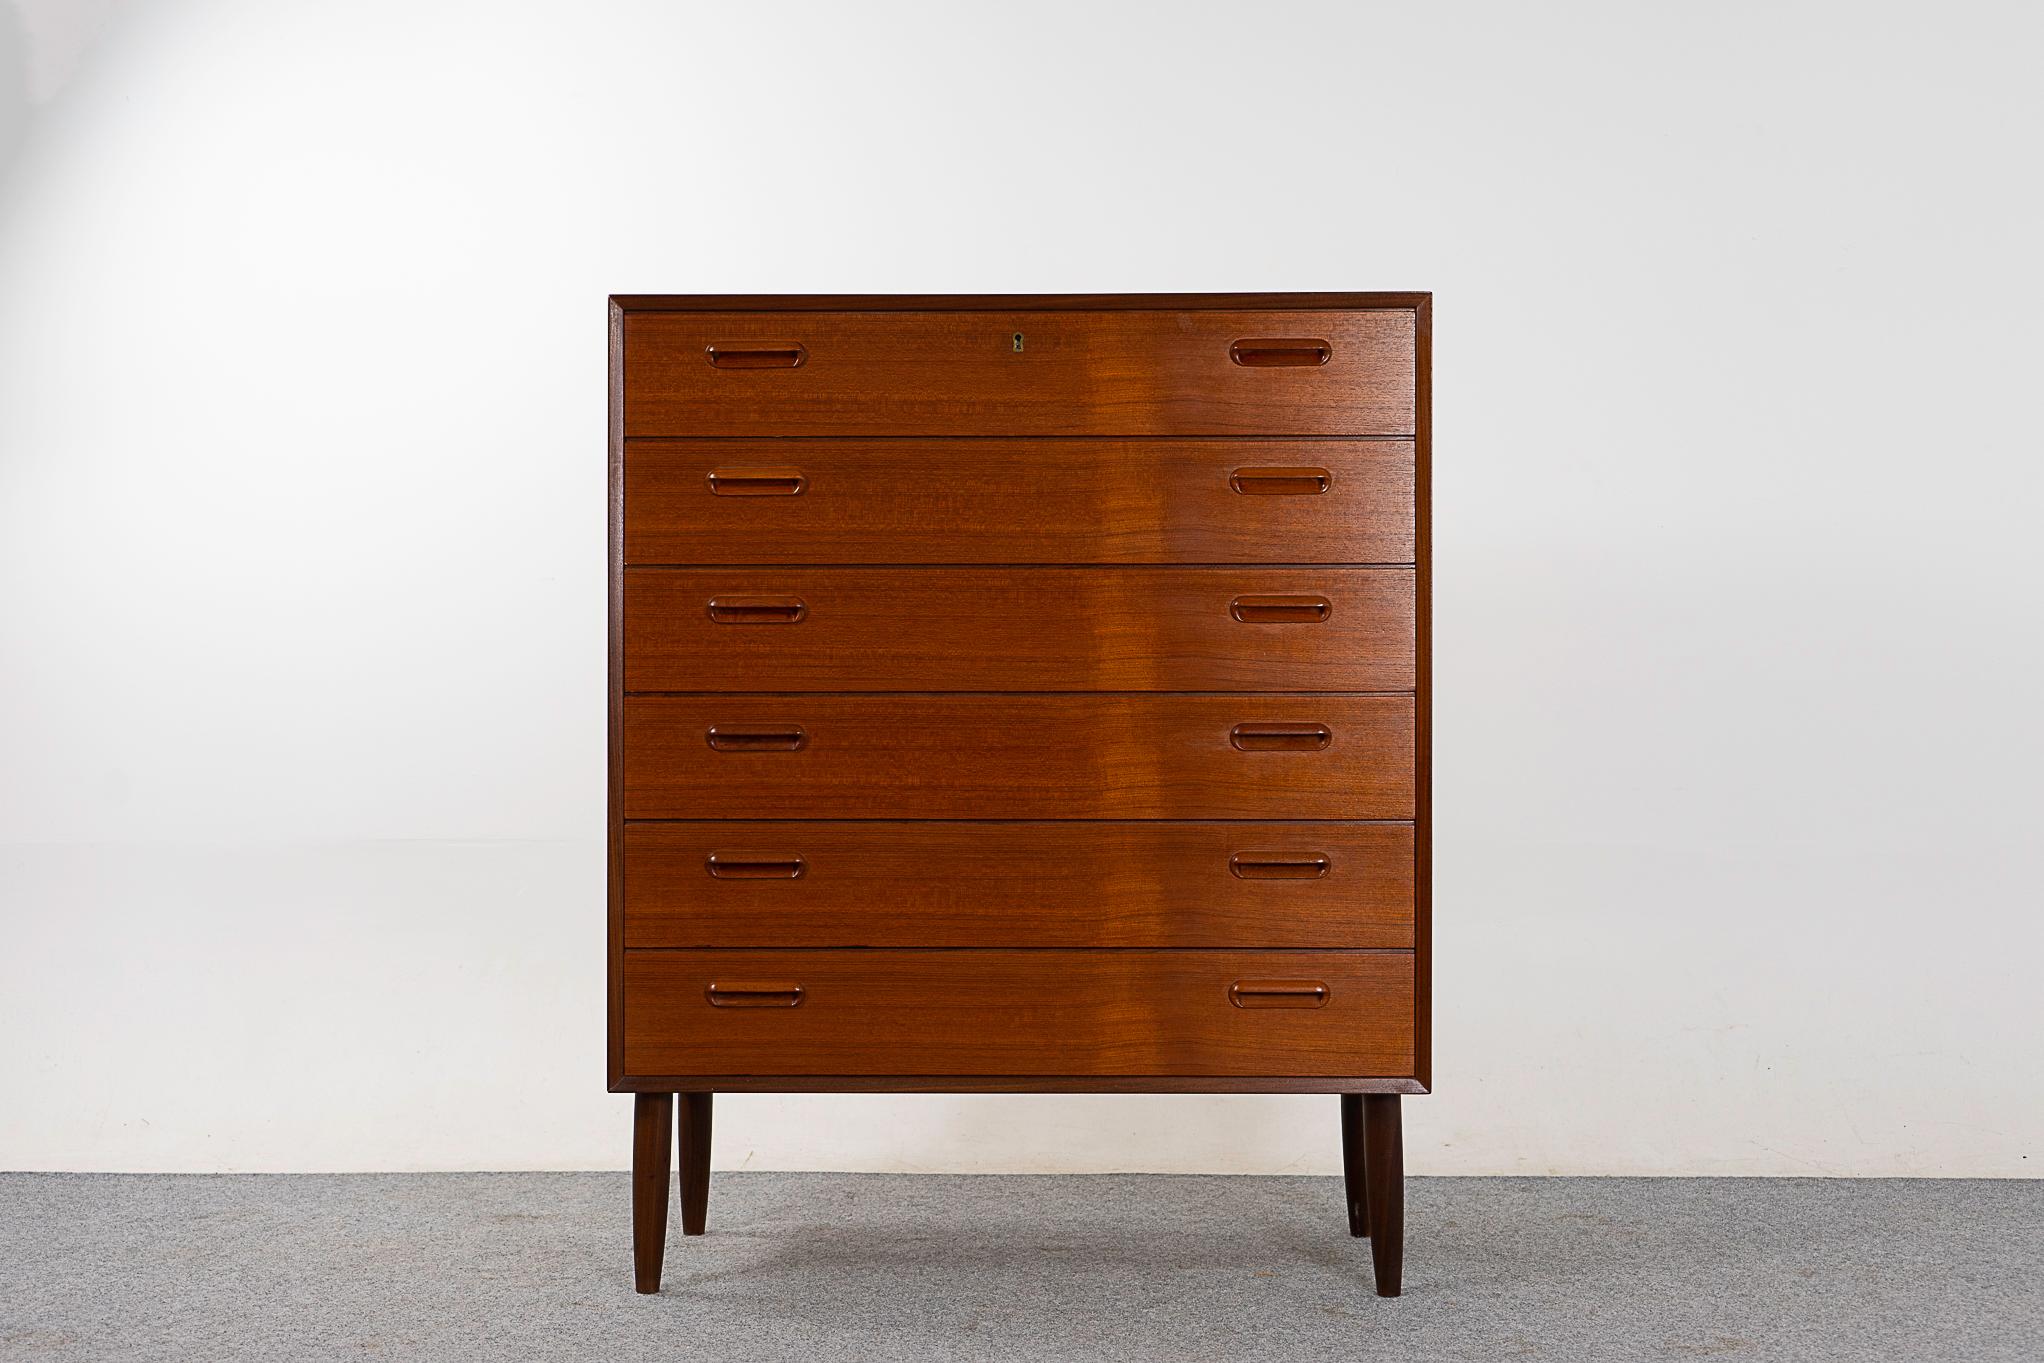 Teak Mid-Century Modern dresser, circa 1960s. Lovely deep hue, great stature too! Sleek integrated horizontal drawer pulls and slim piked legs. Glam up your bedroom. 

Unrestored item, very minor marks, consistent with age.

Please inquire for